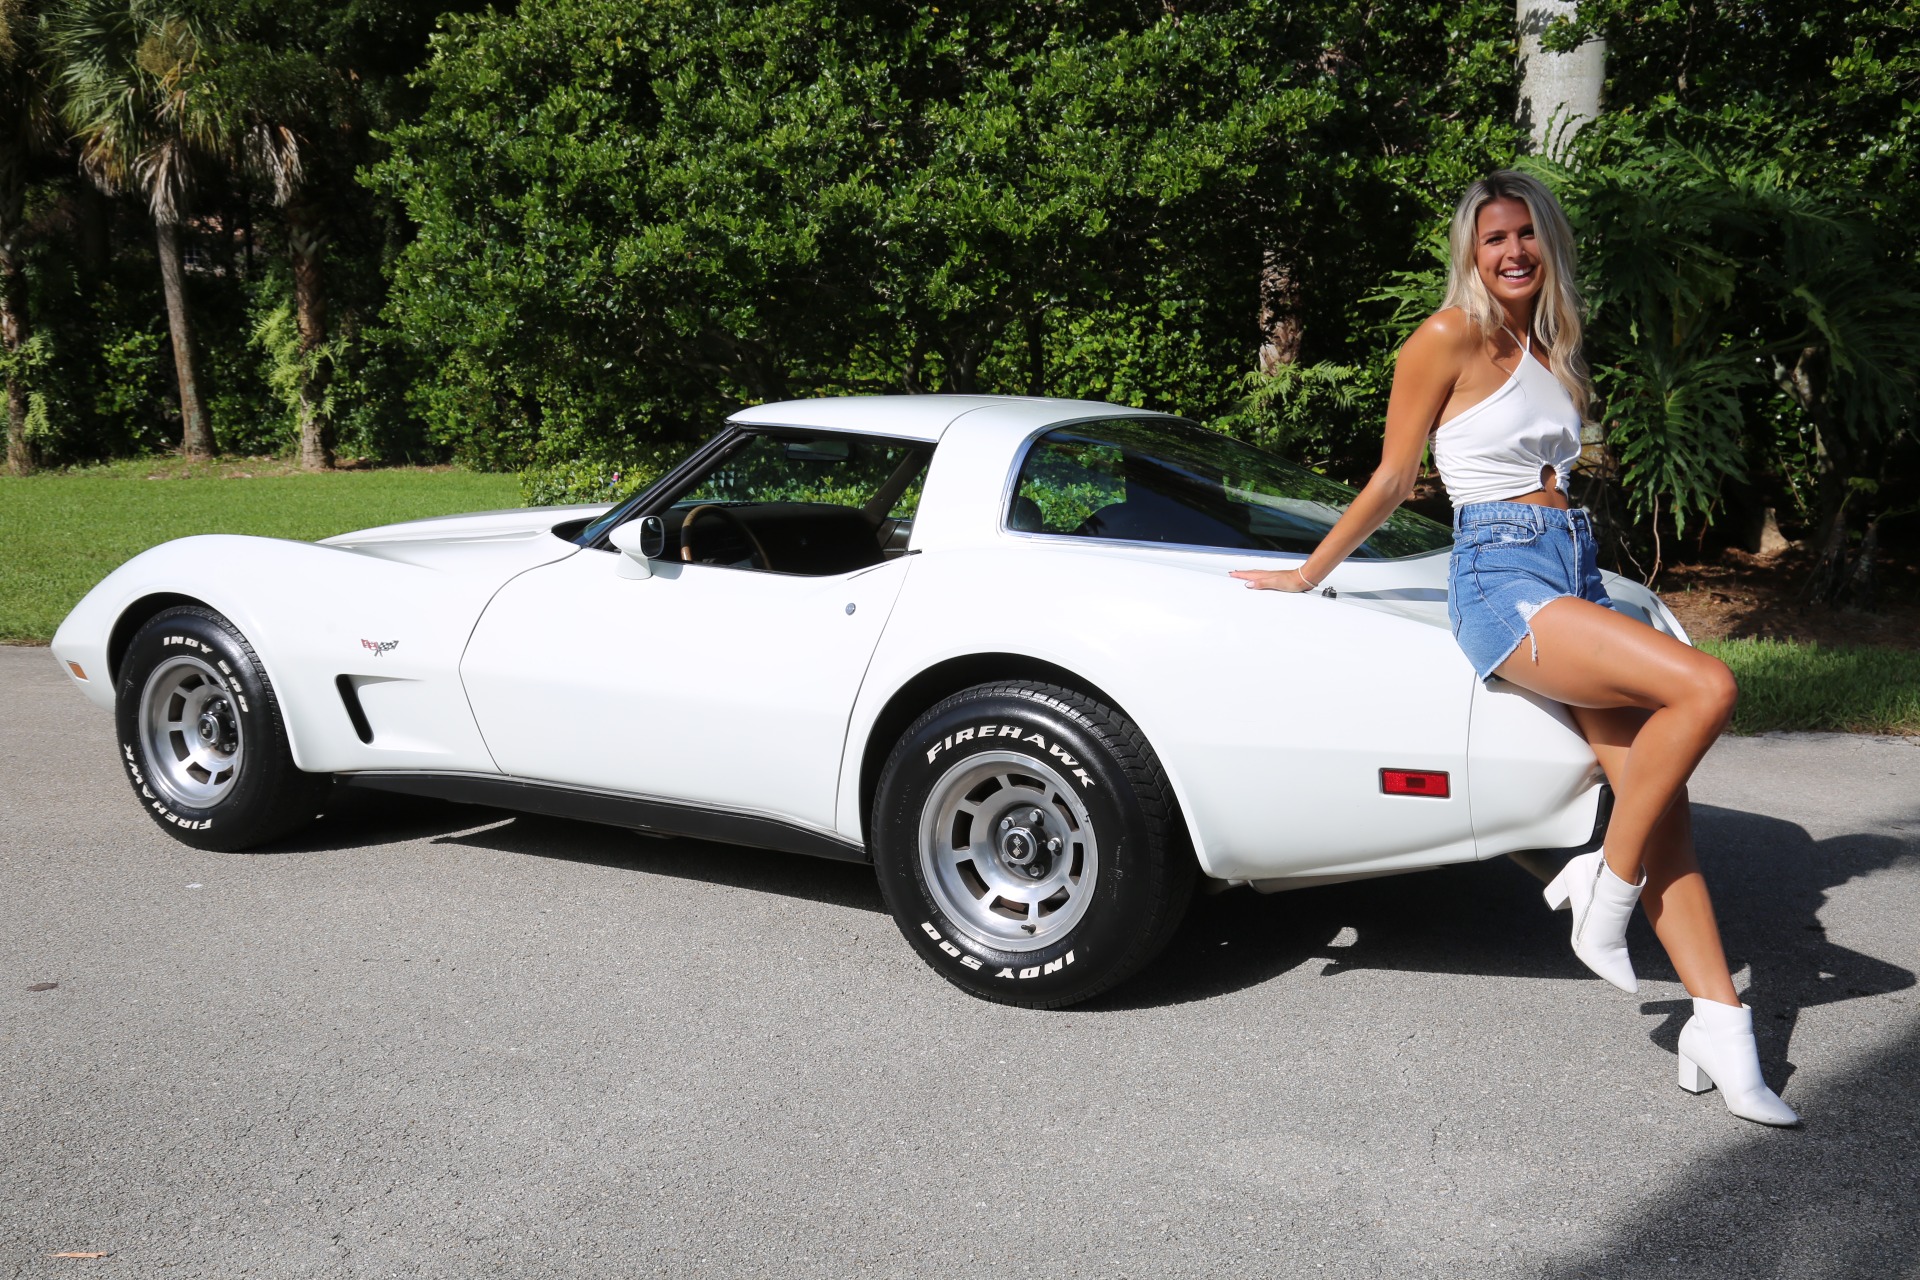 Used 1978 Chevrolet Corvette Anniversary Edition for sale $15,800 at Muscle Cars for Sale Inc. in Fort Myers FL 33912 1